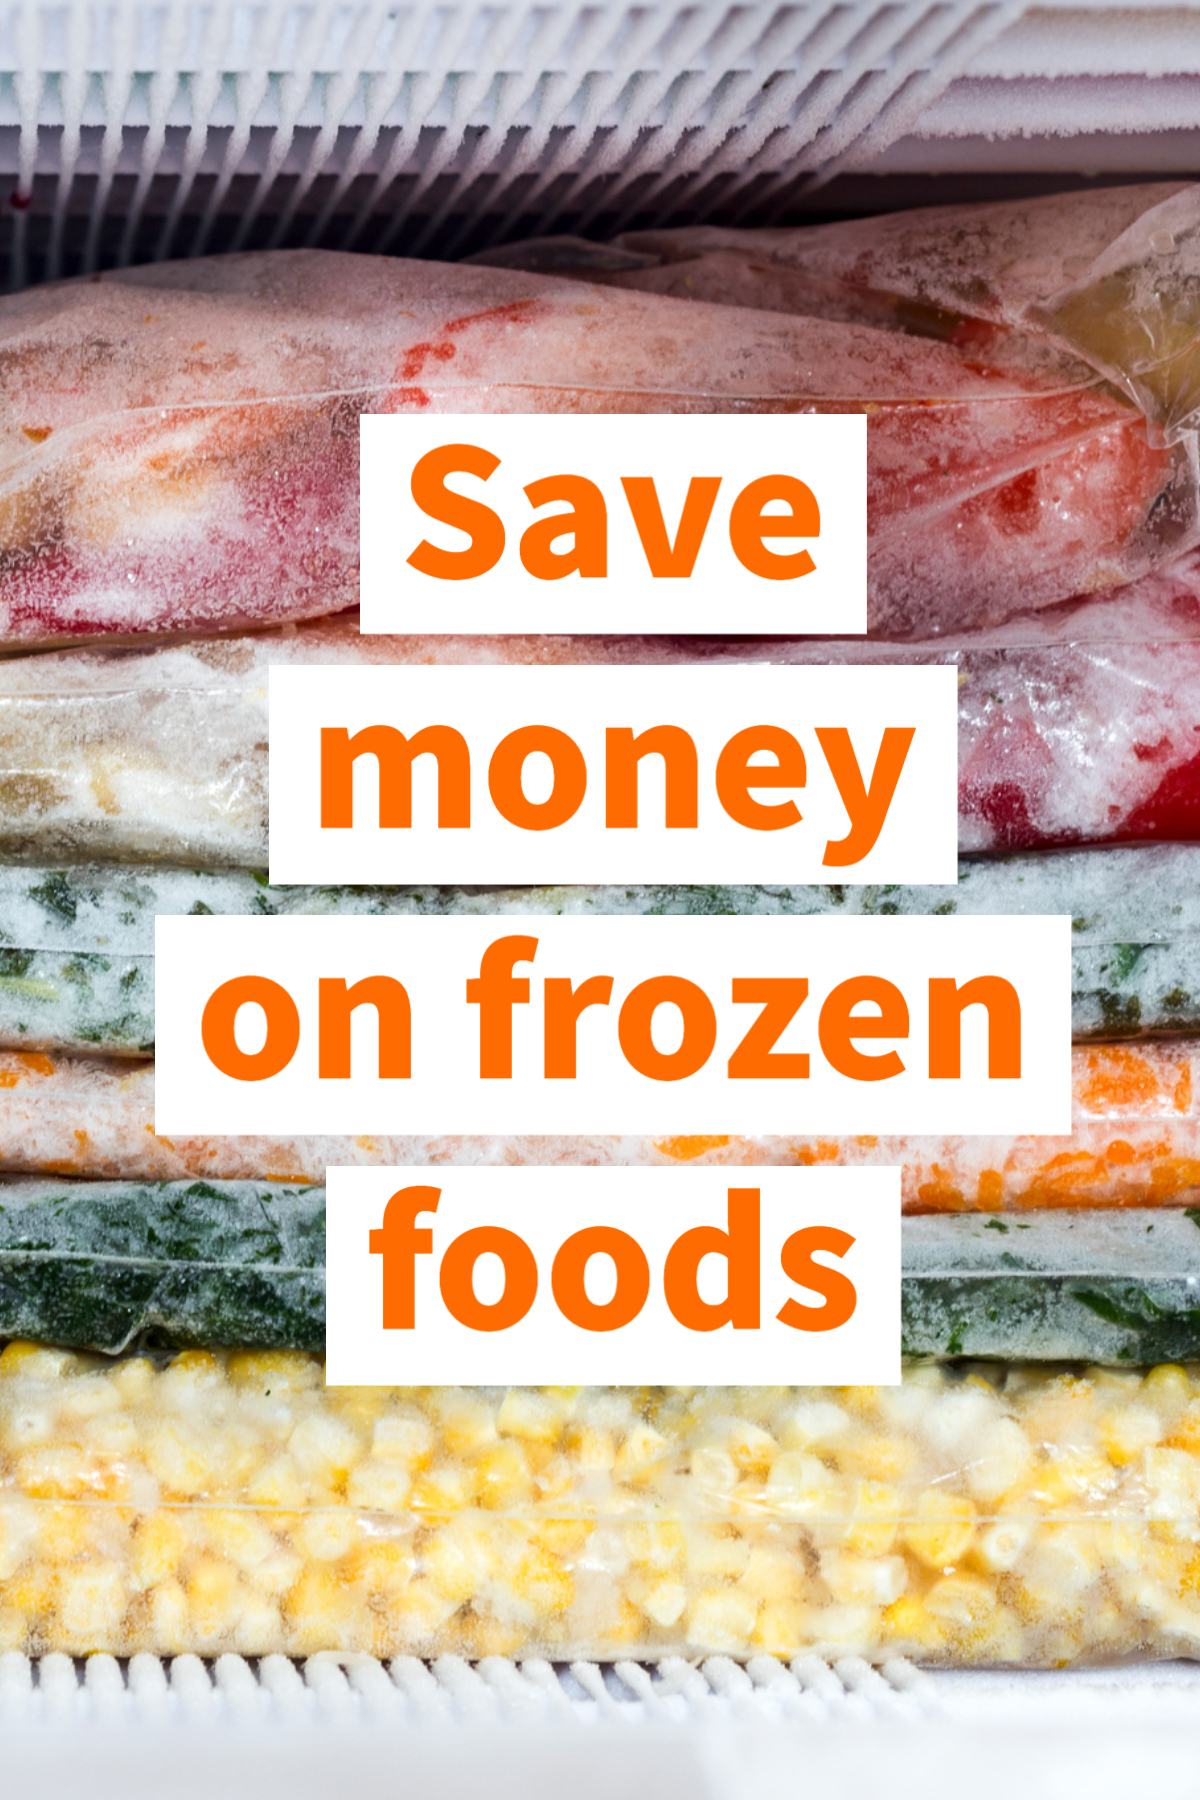 How to Fill Your Freezer and Save Money